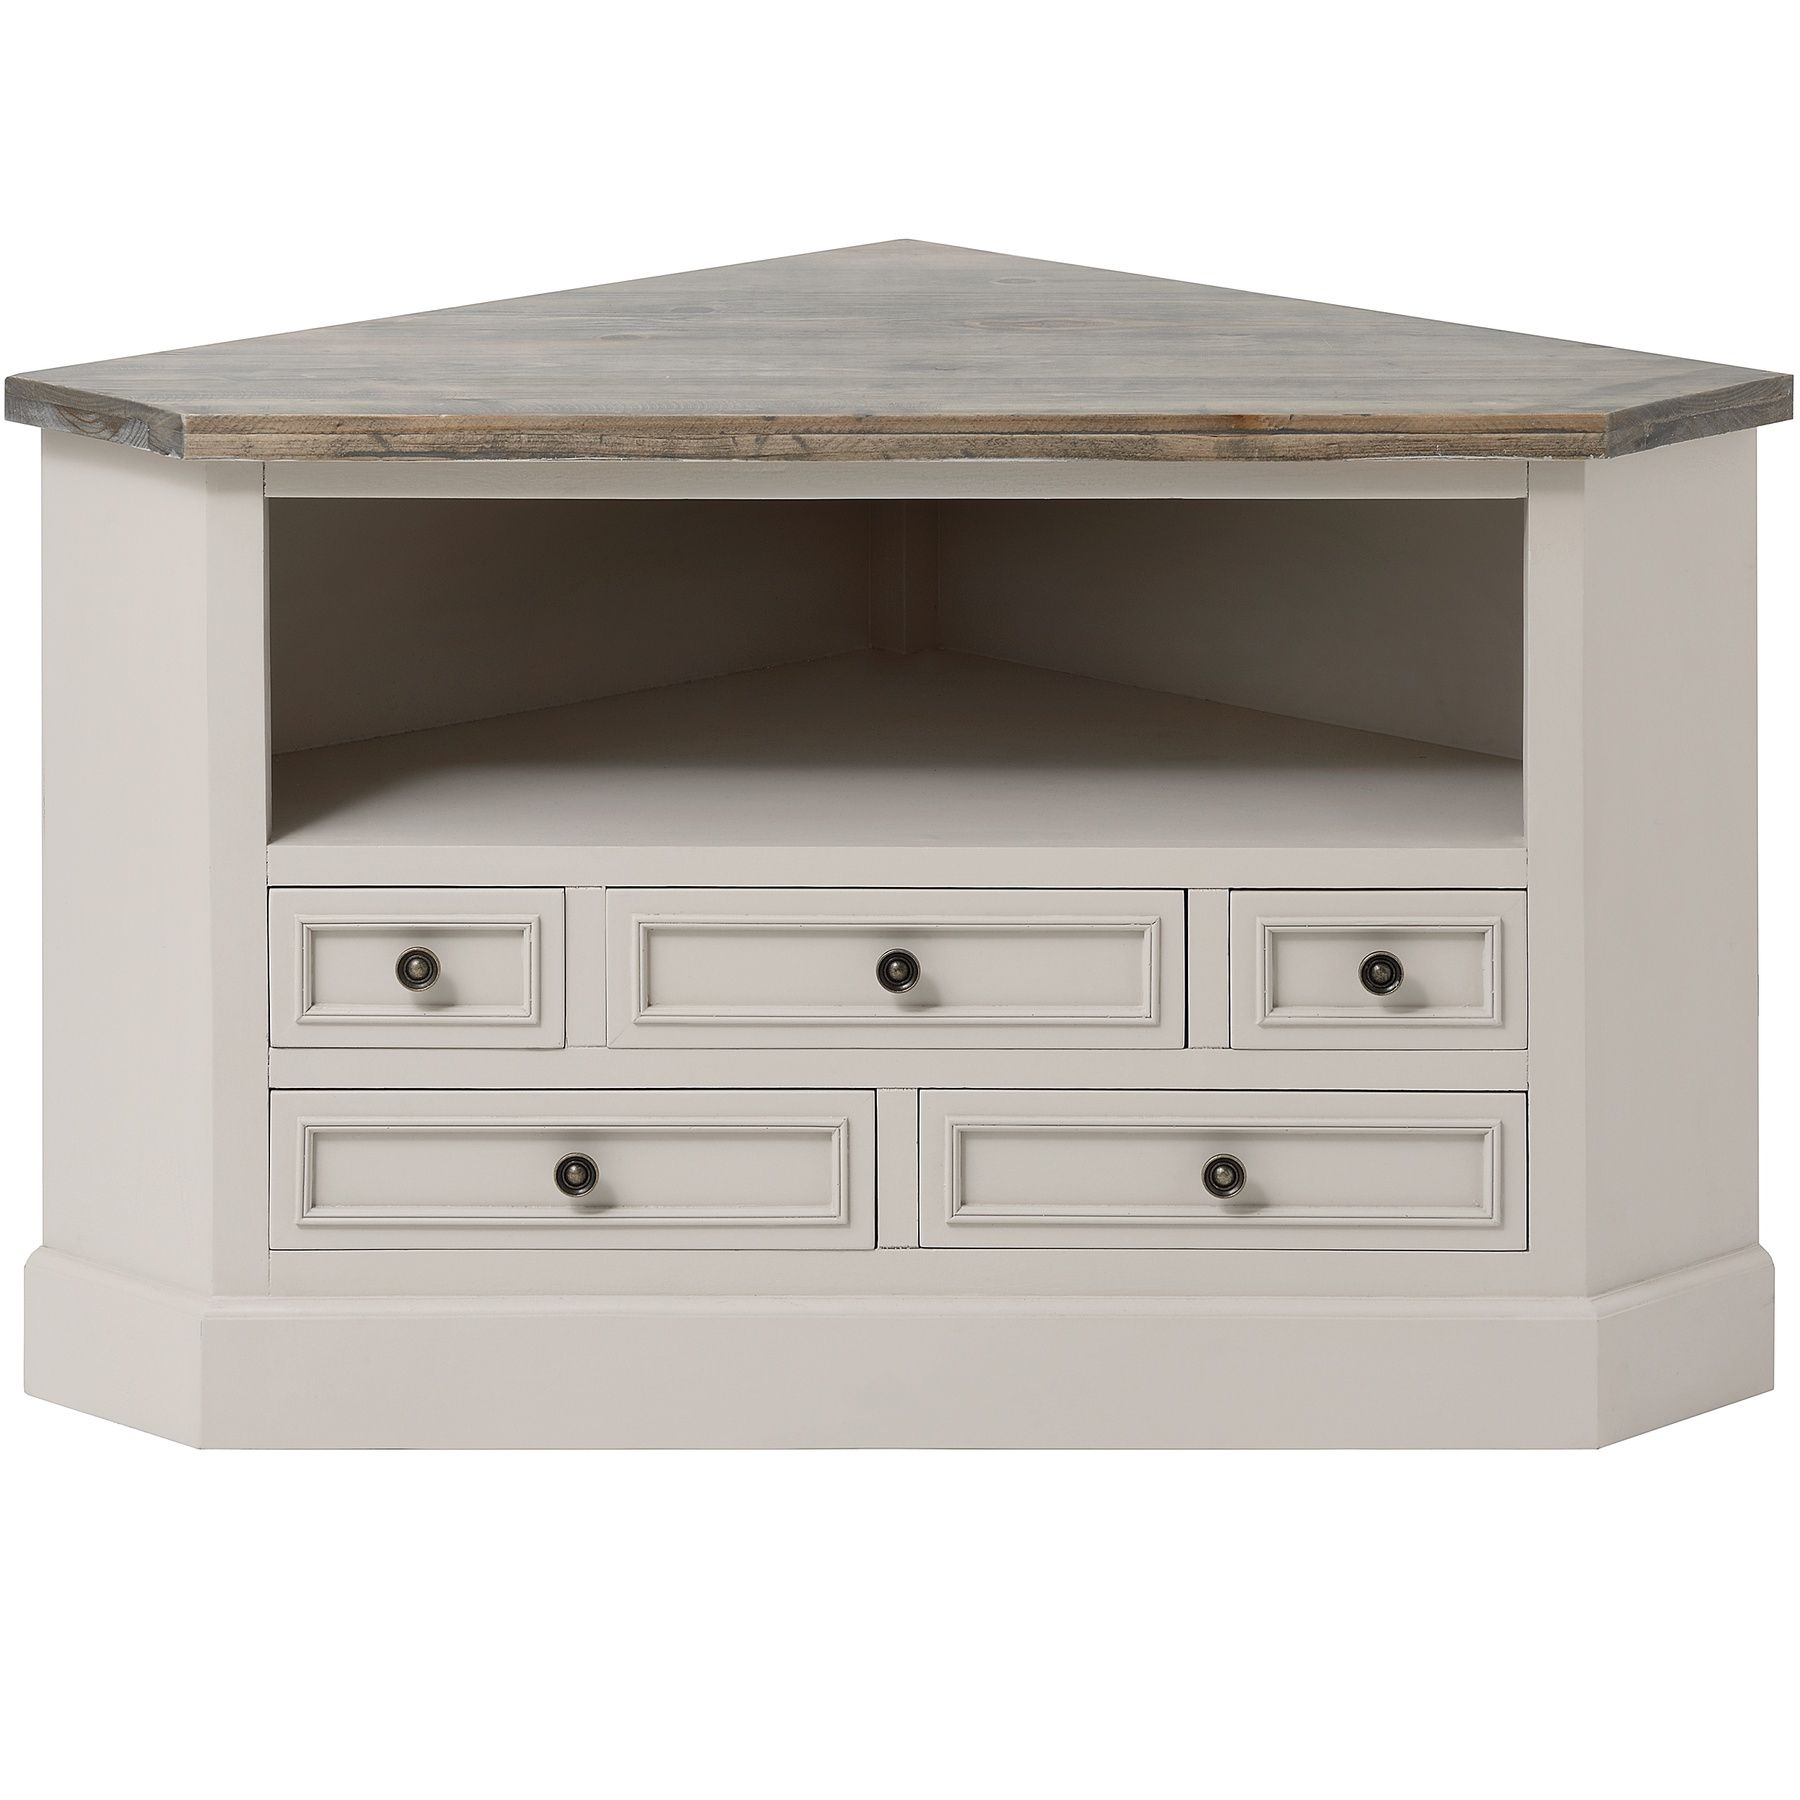 Room Cabinets – Mirrored & Wood Options (View 13 of 20)